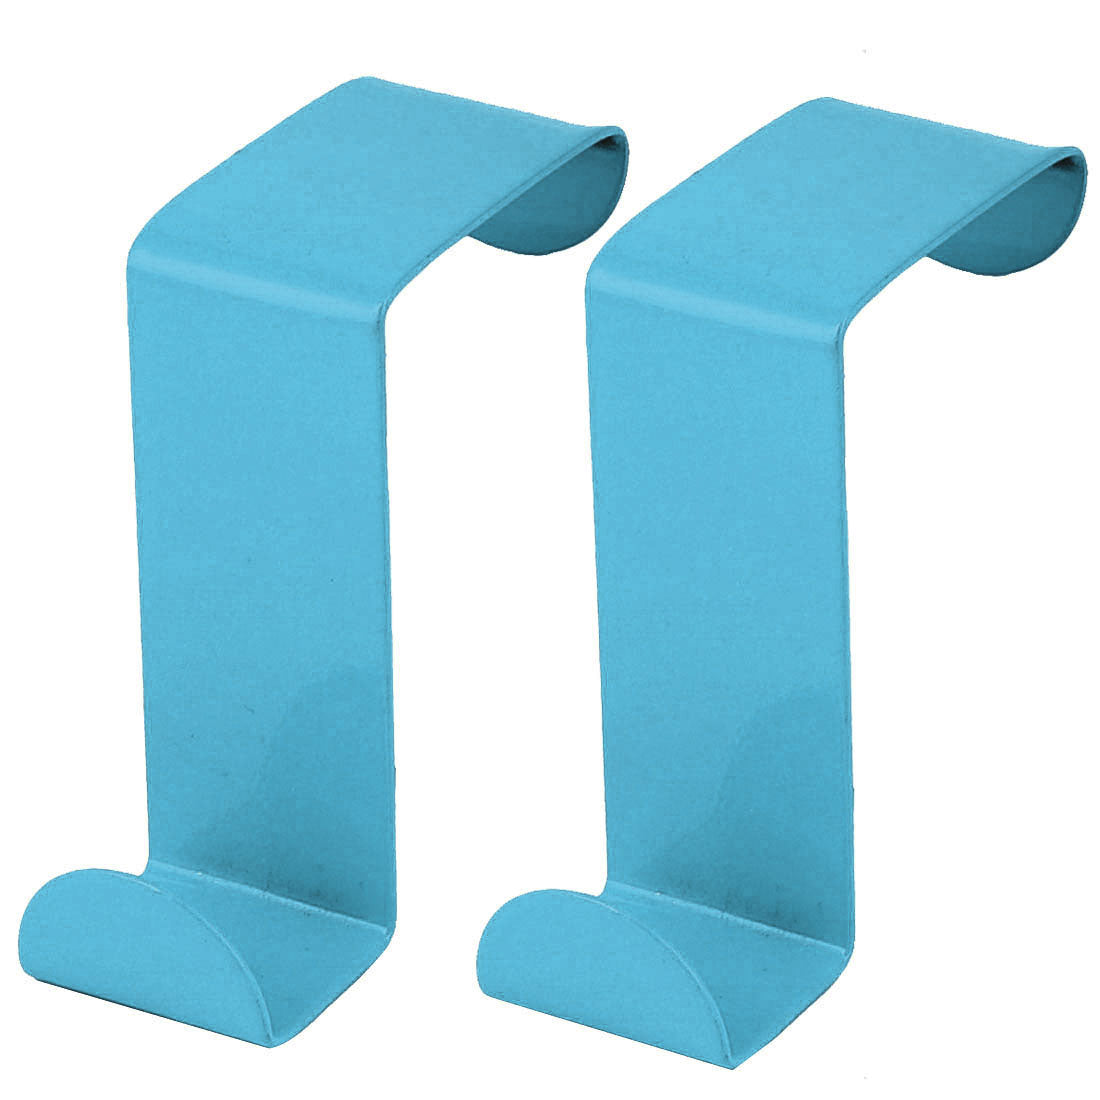 uxcell Uxcell Household Metal Z Shaped Over Door Hooks Clothes Towel Hanger Holder Blue 2 Pcs